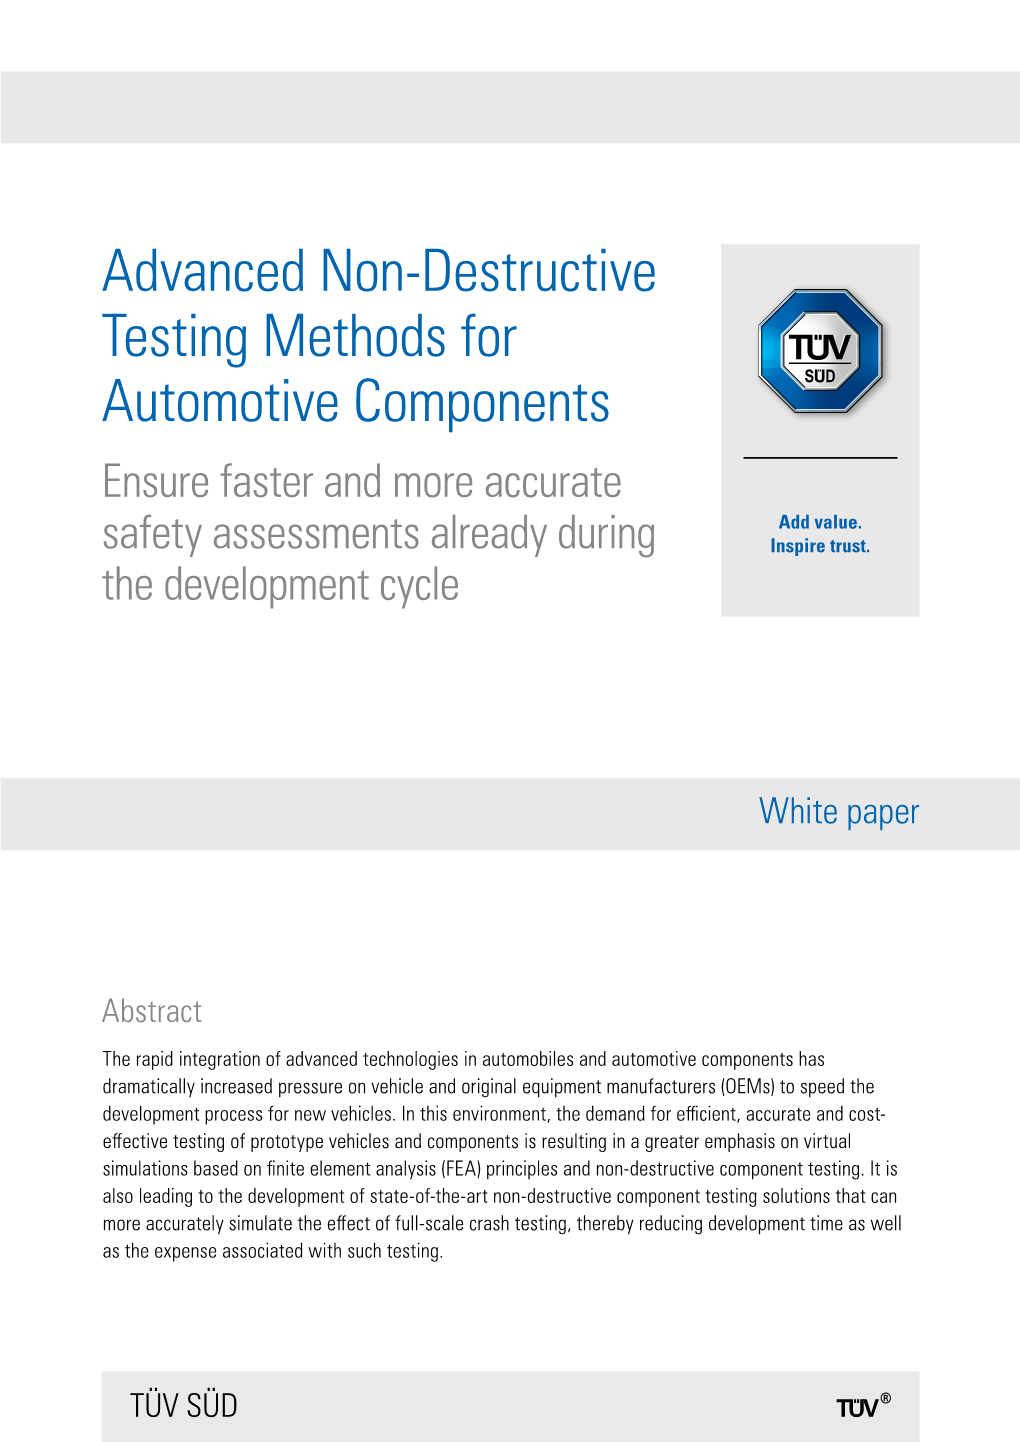 Advanced Non-Destructive Testing Methods for Automotive Components Ensure Faster and More Accurate Safety Assessments Already During the Development Cycle